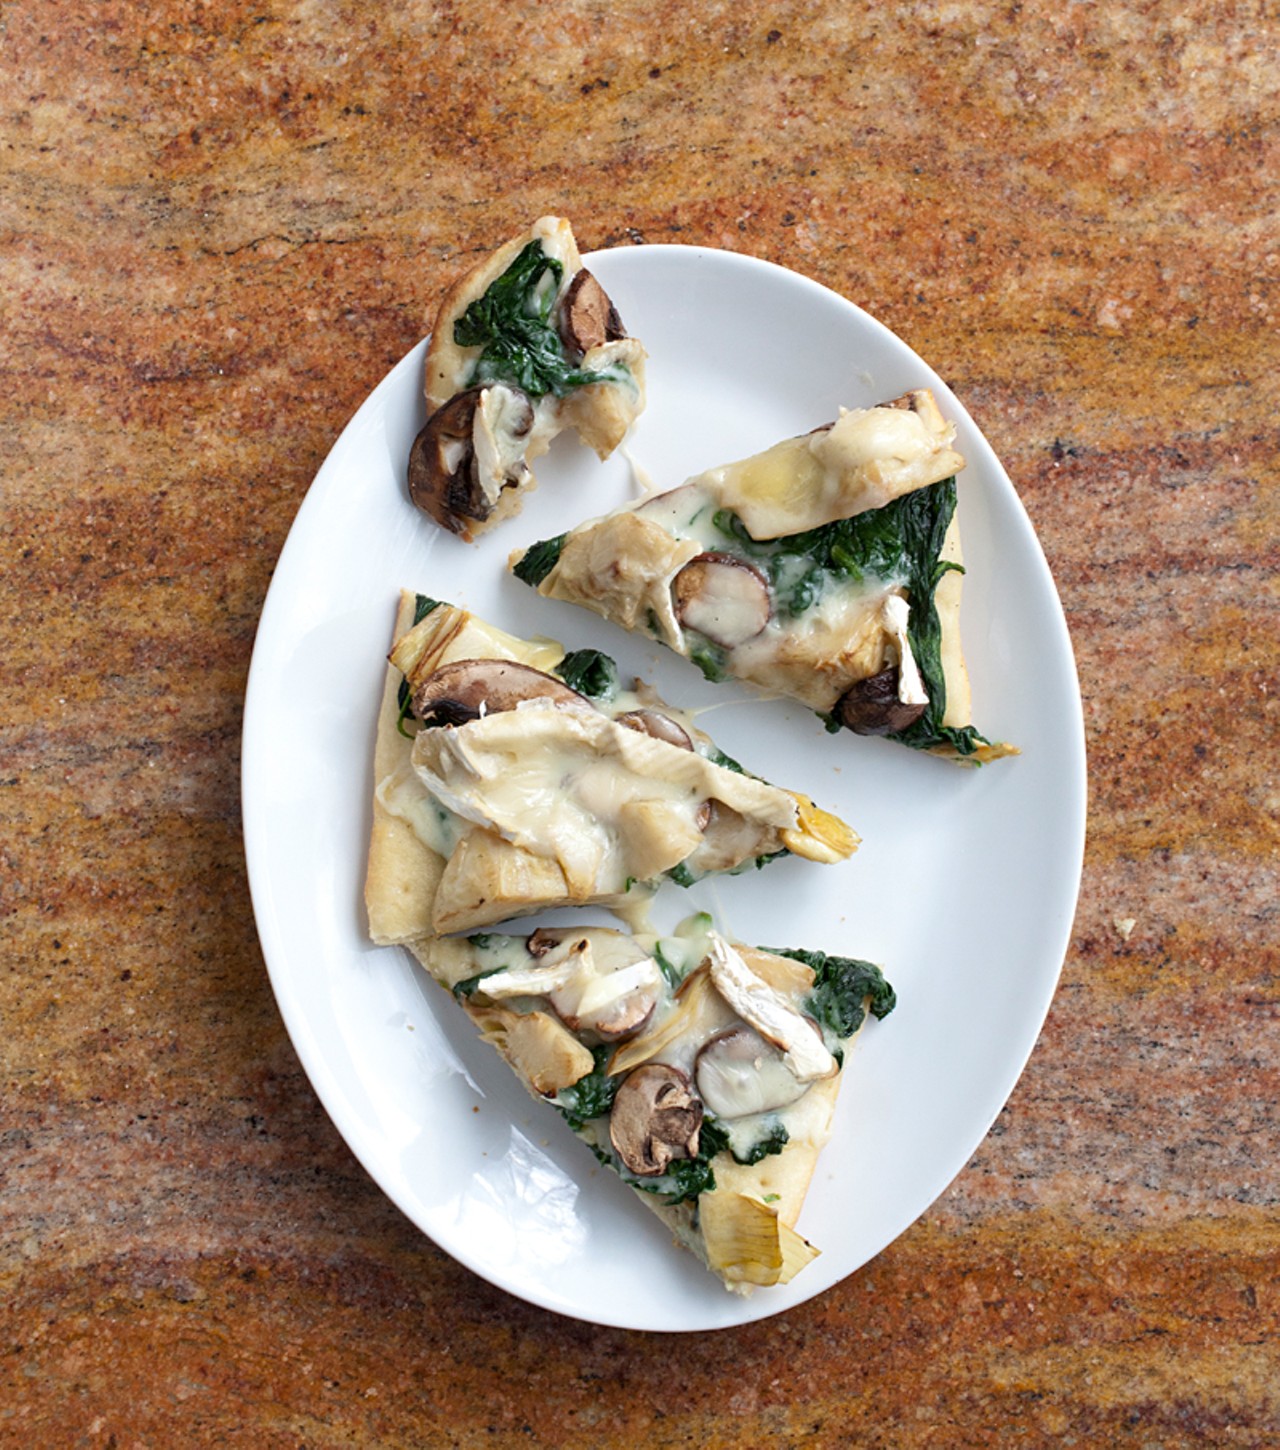 Roasted-artichoke flatbread with portabella mushrooms, spinach and Camembert cheese.